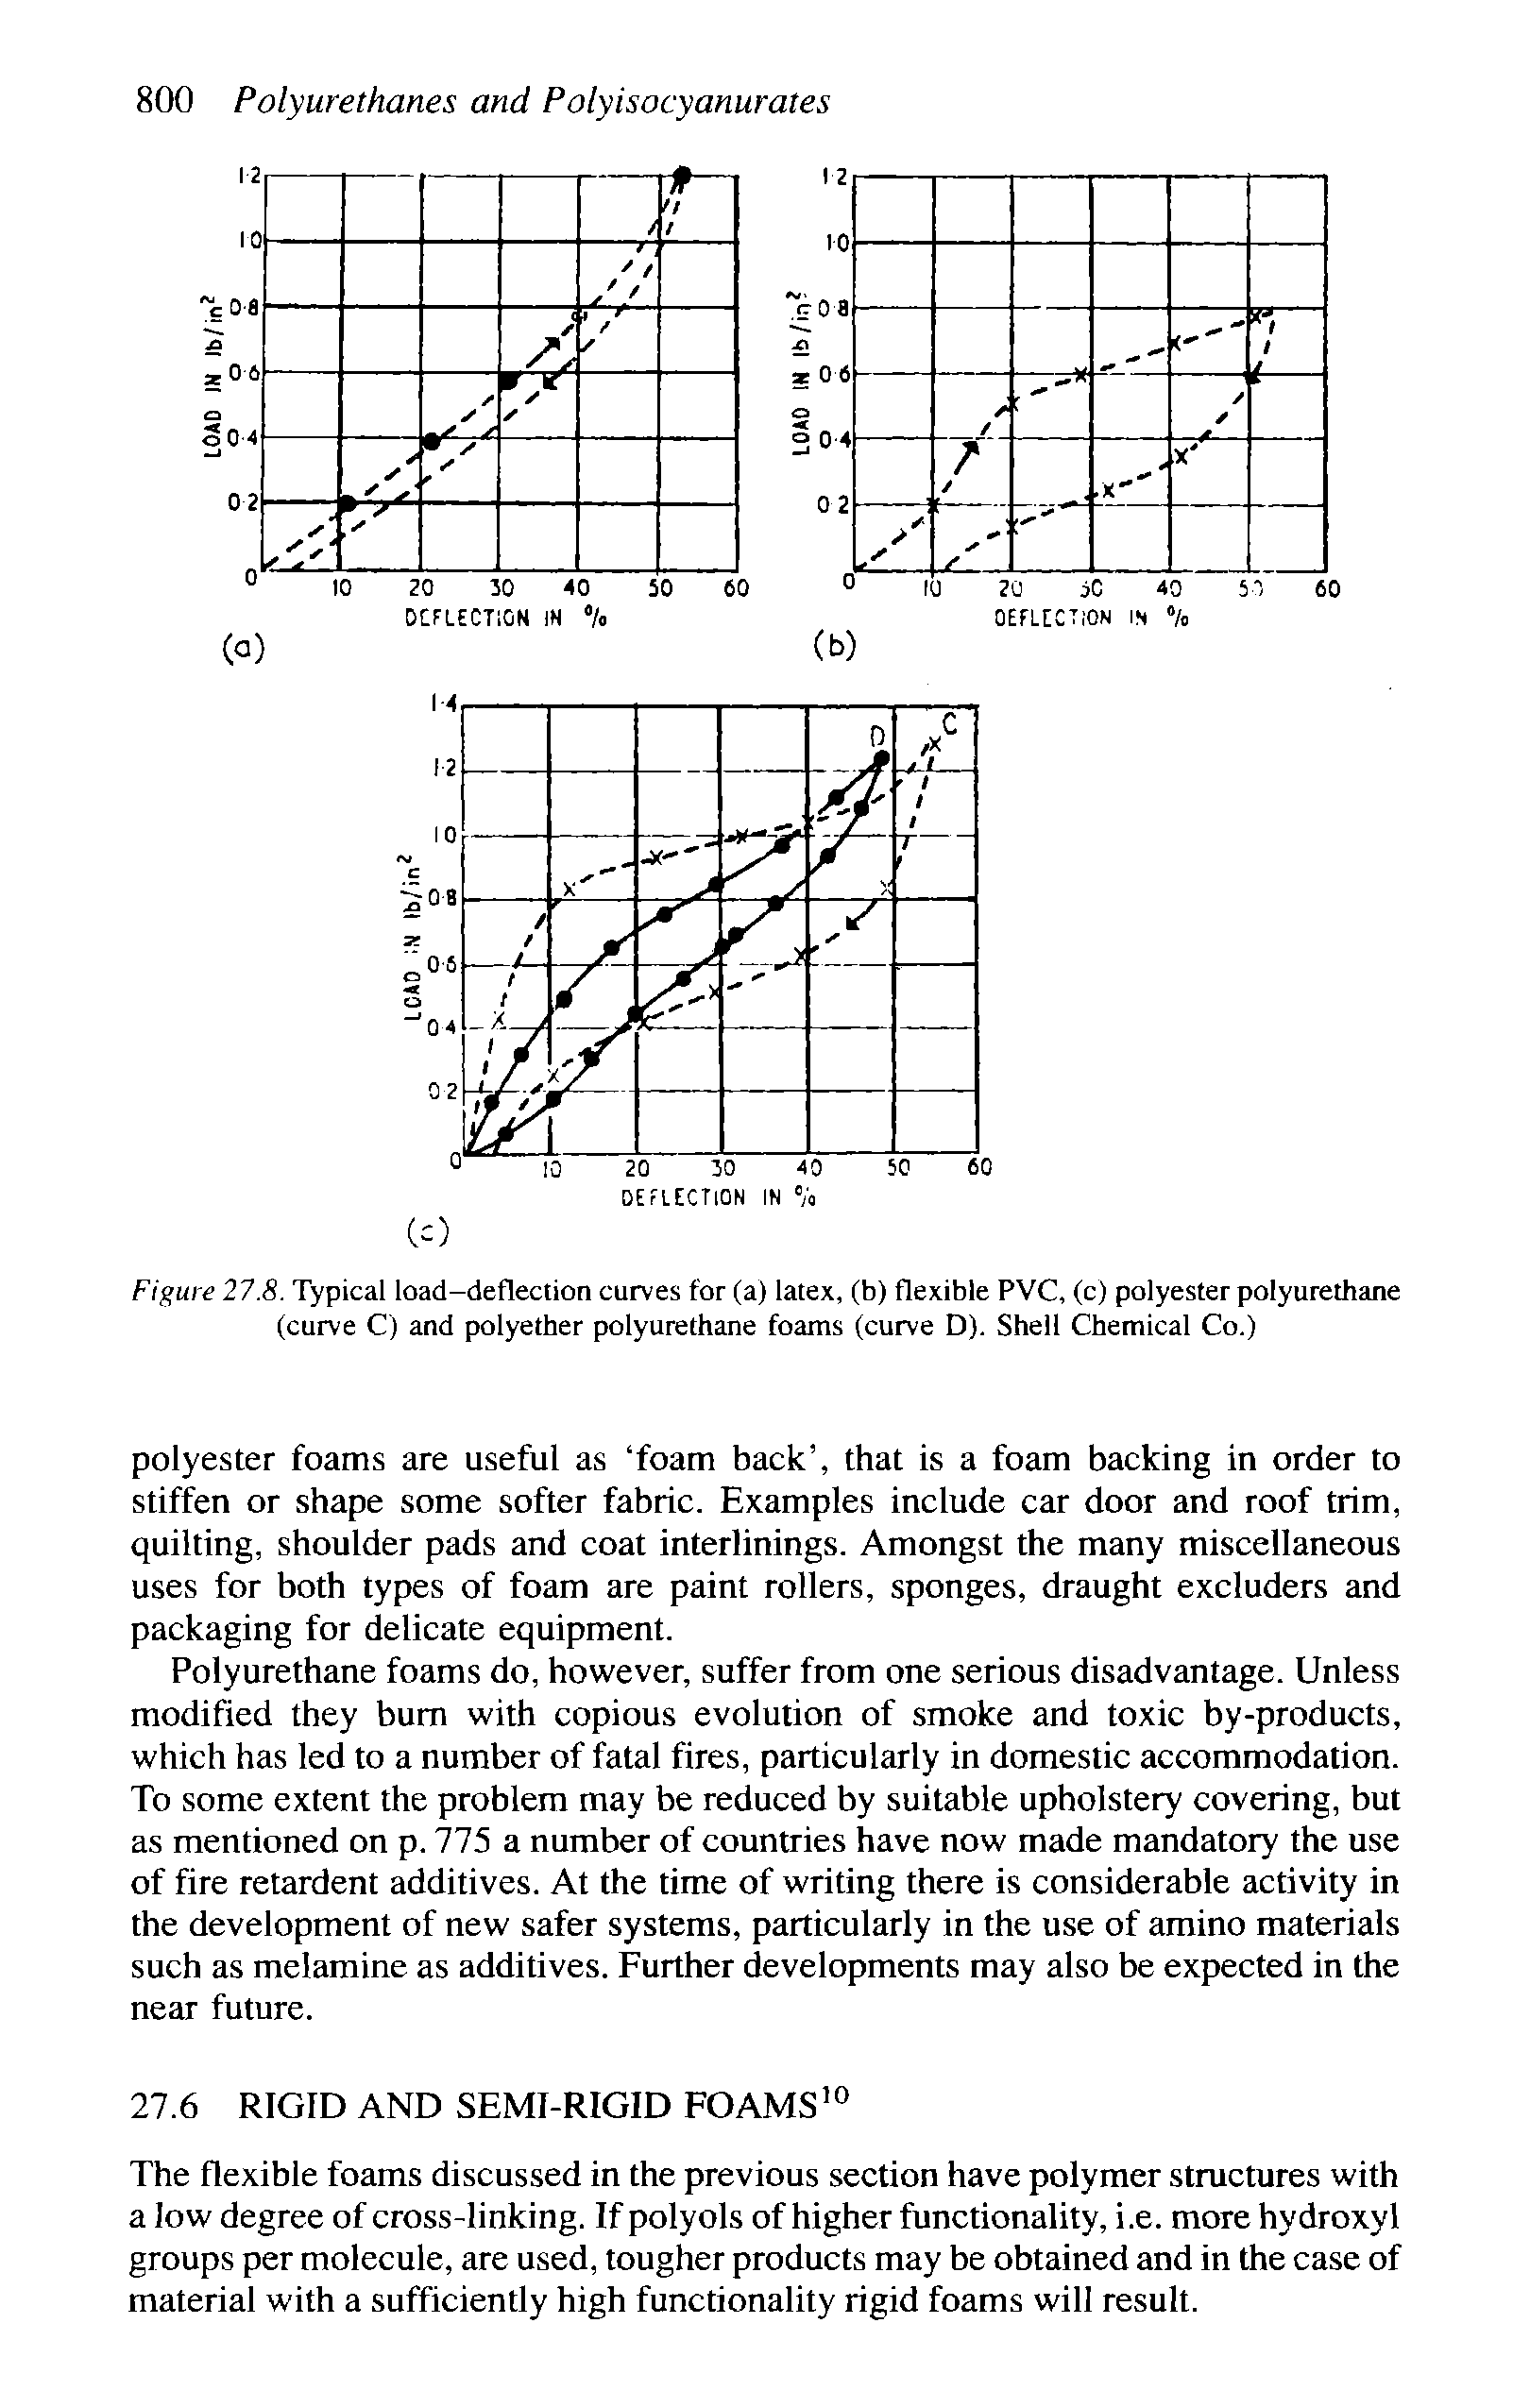 Figure 27.8. Typical load-deflection curves for (a) latex, (b) flexible PVC, (c) polyester polyurethane (curve C) and polyether polyurethane foams (curve D). Shell Chemical Co.)...